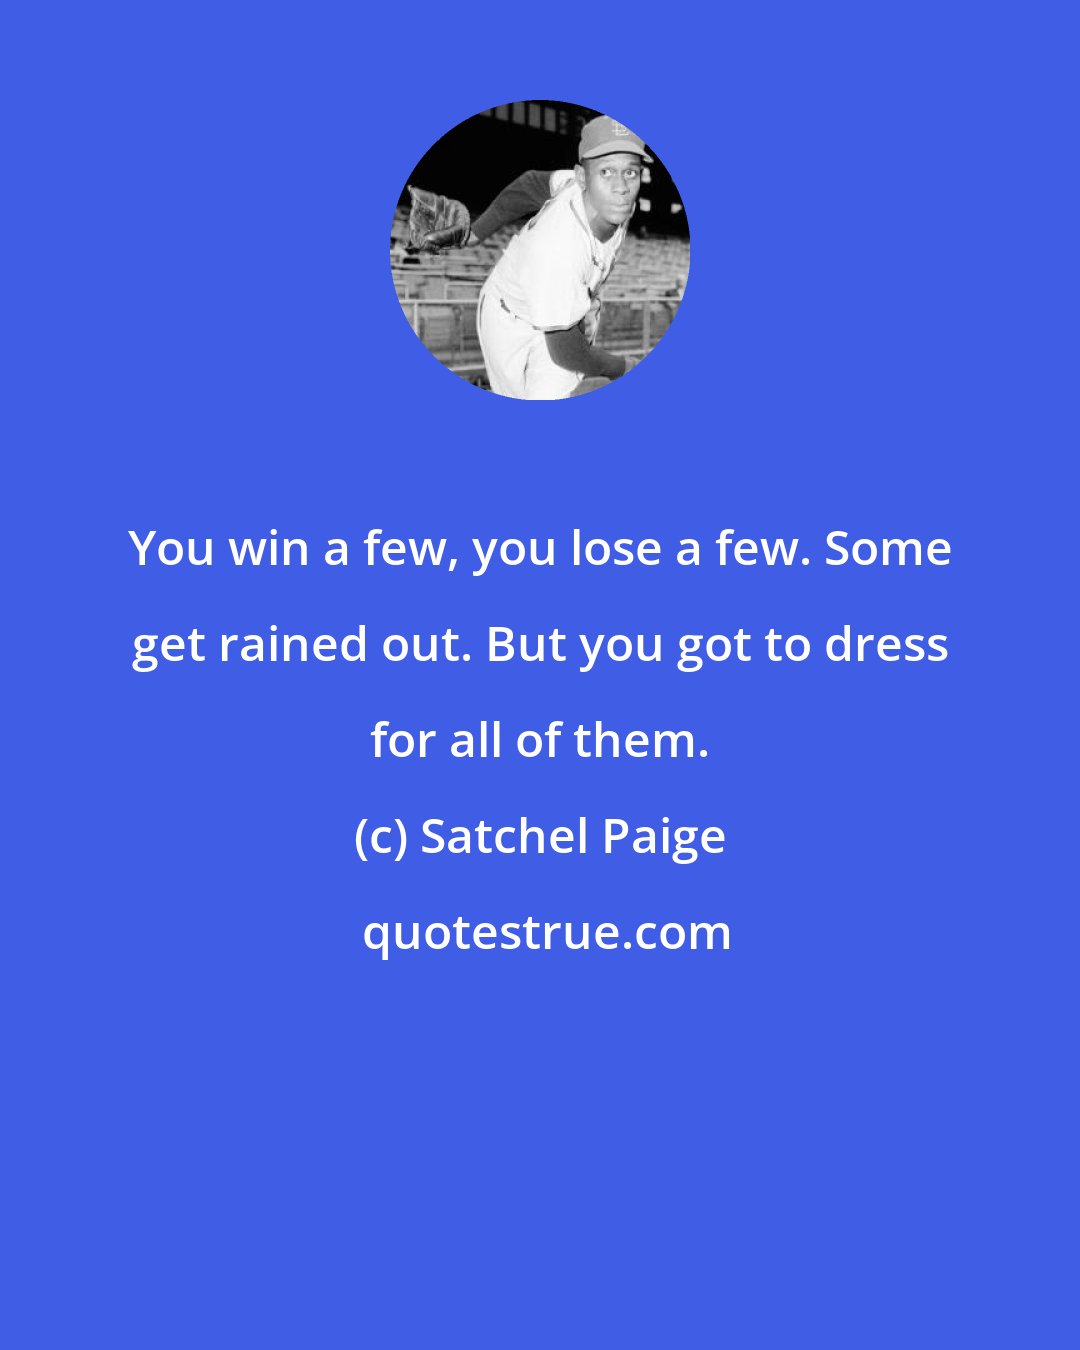 Satchel Paige: You win a few, you lose a few. Some get rained out. But you got to dress for all of them.